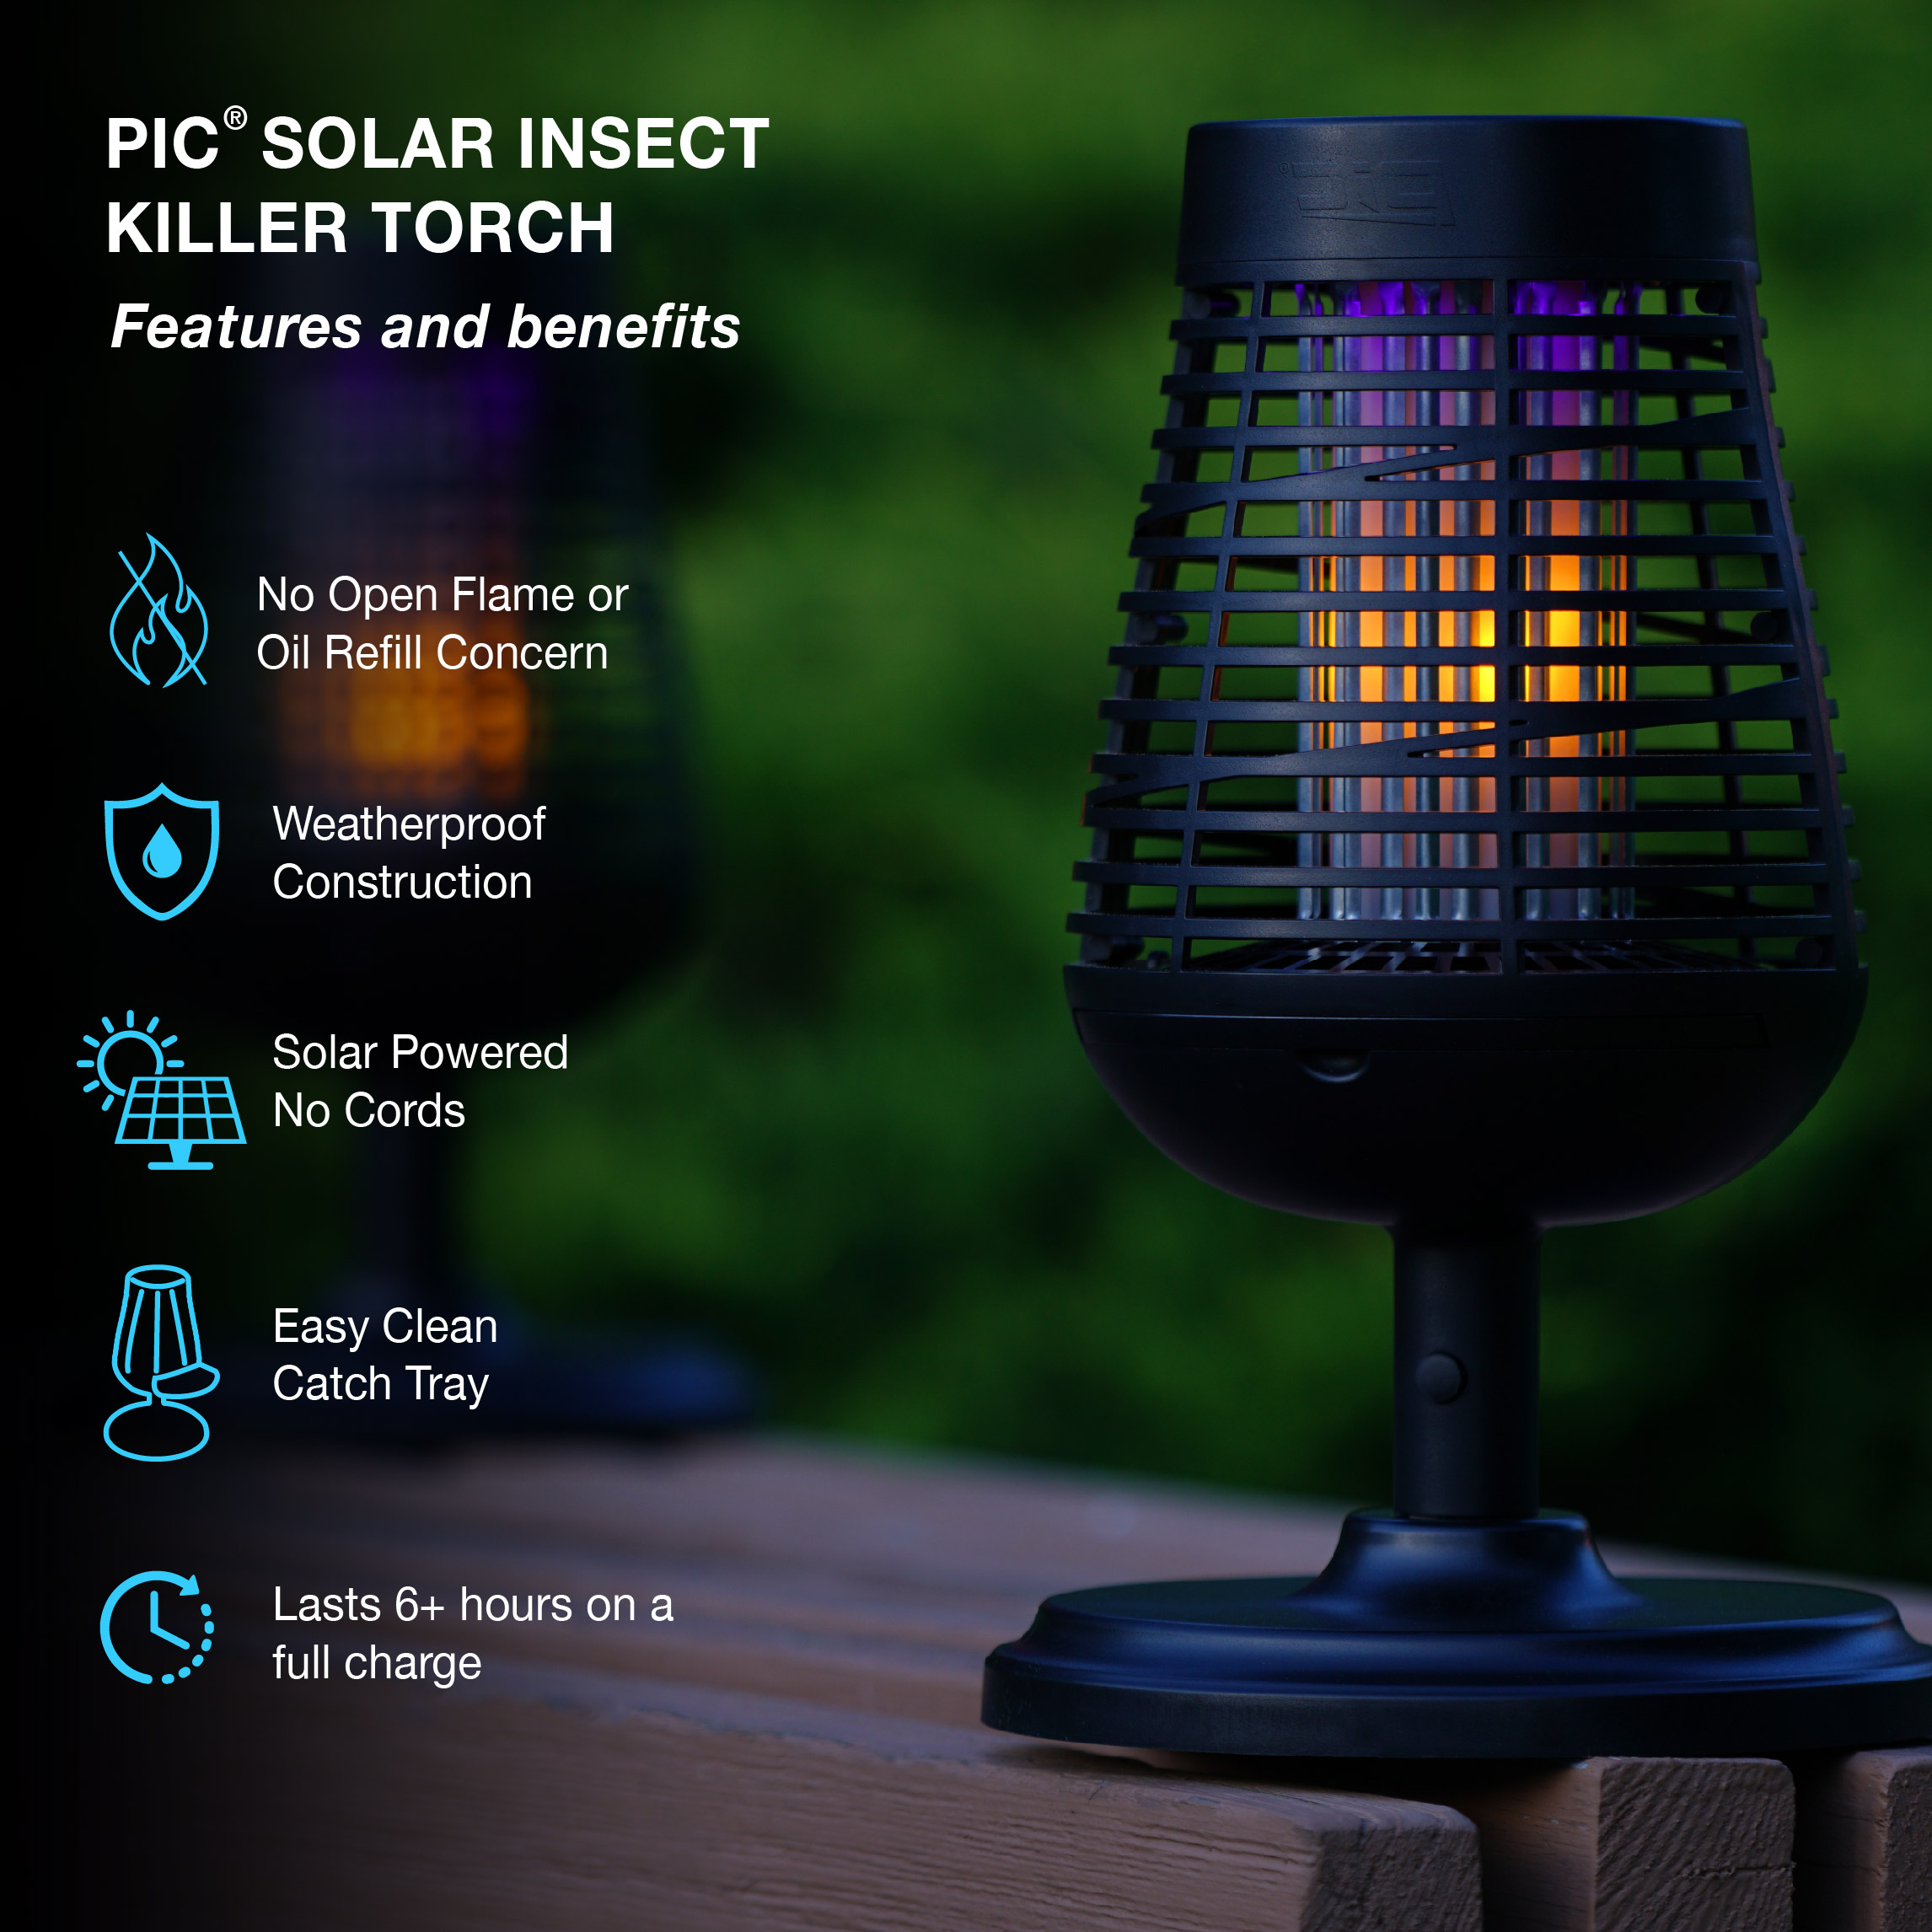 PIC Insect Killer Torch Review: Best Bug Zapper?